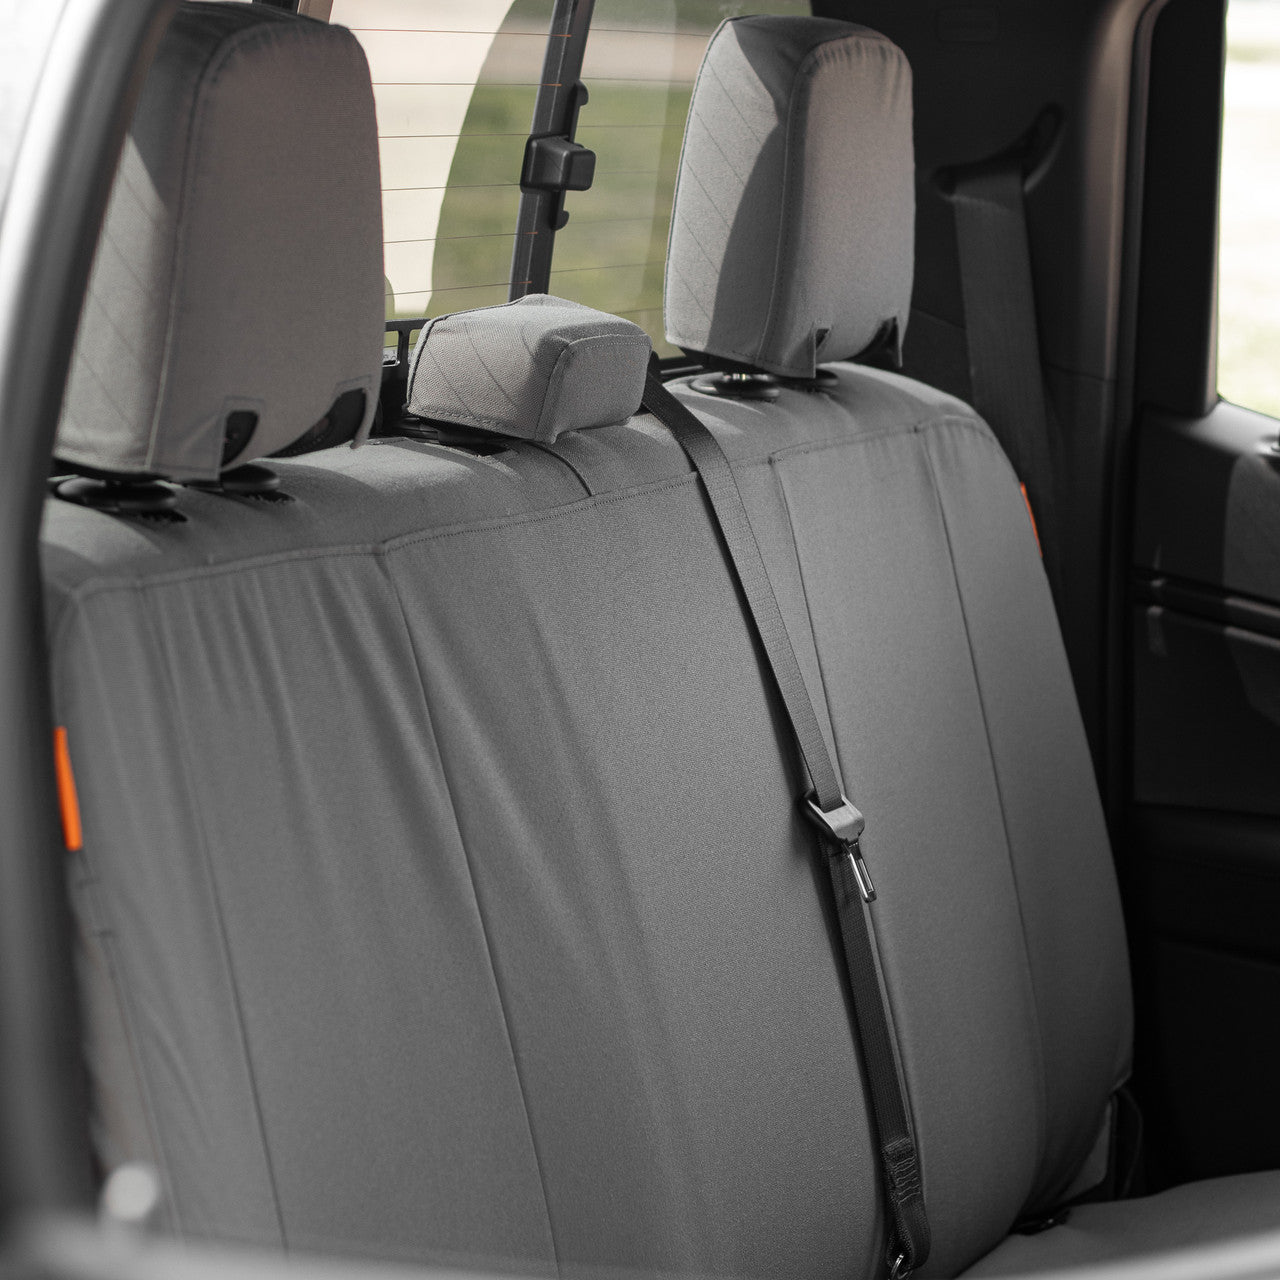 Ultra durable seat covers for the Chevy Colorado. Great warranty, built from 1000 denier Cordura